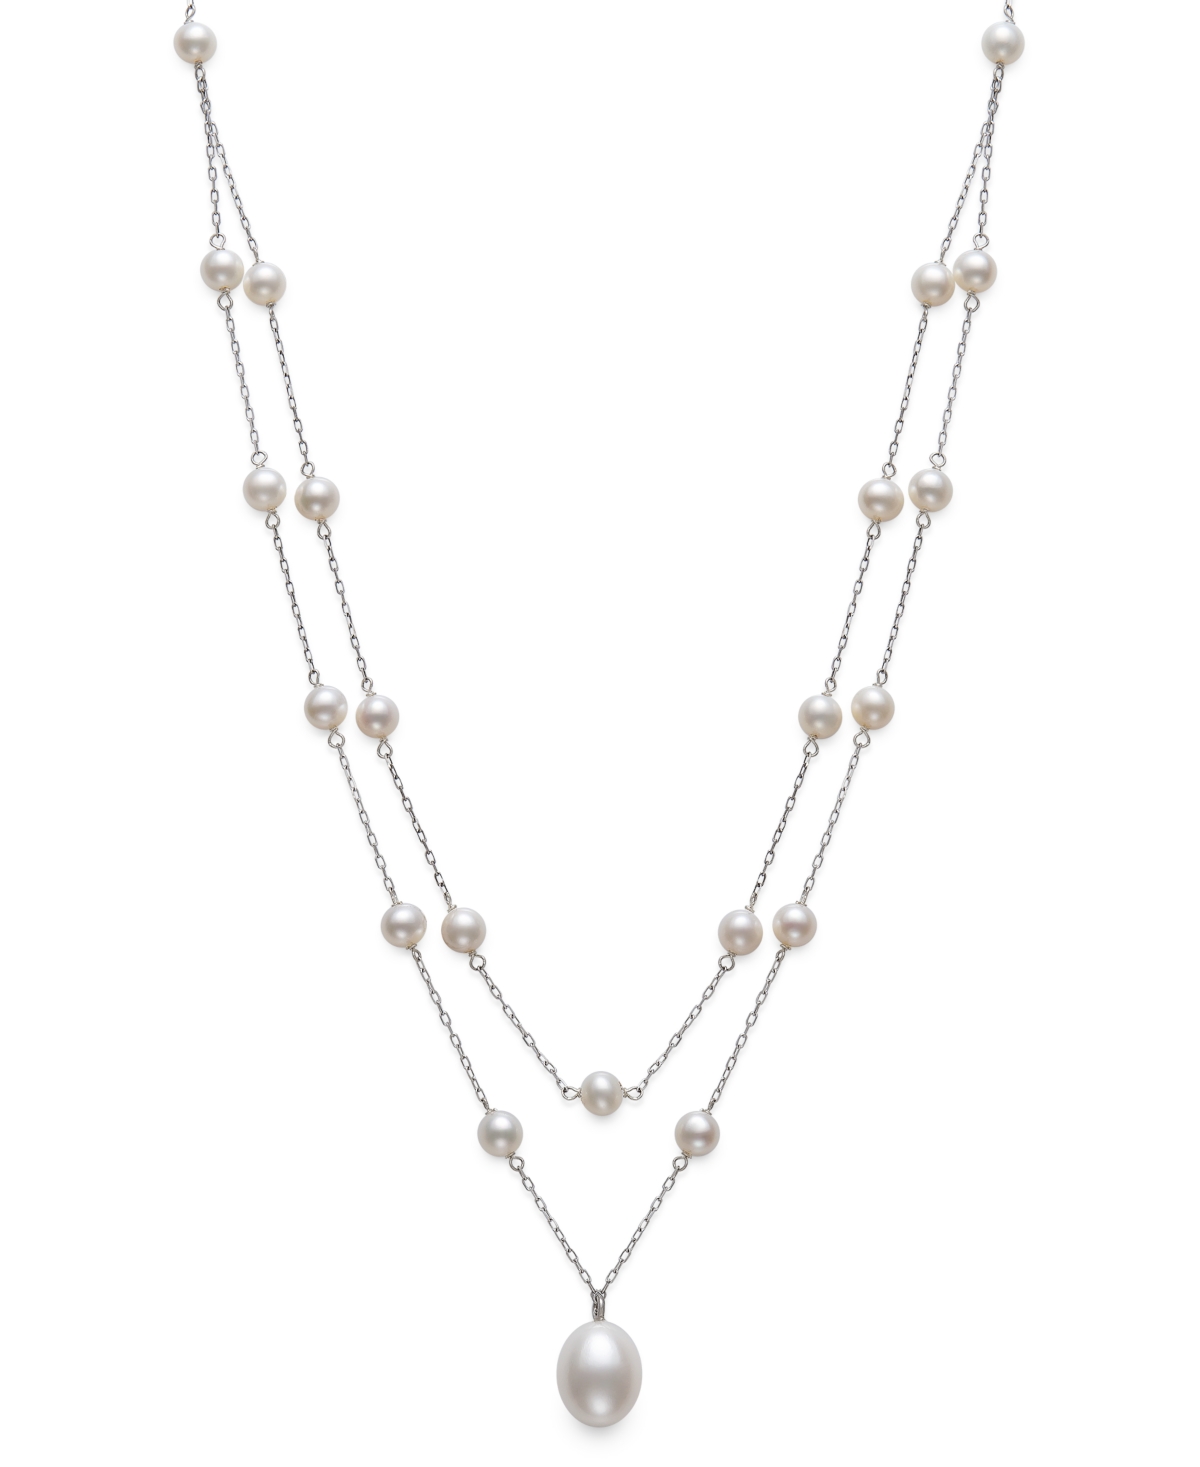 Cultured Freshwater Pearl (5-6mm & 9-10mm) 16" Layered Necklace in Sterling Silver - White